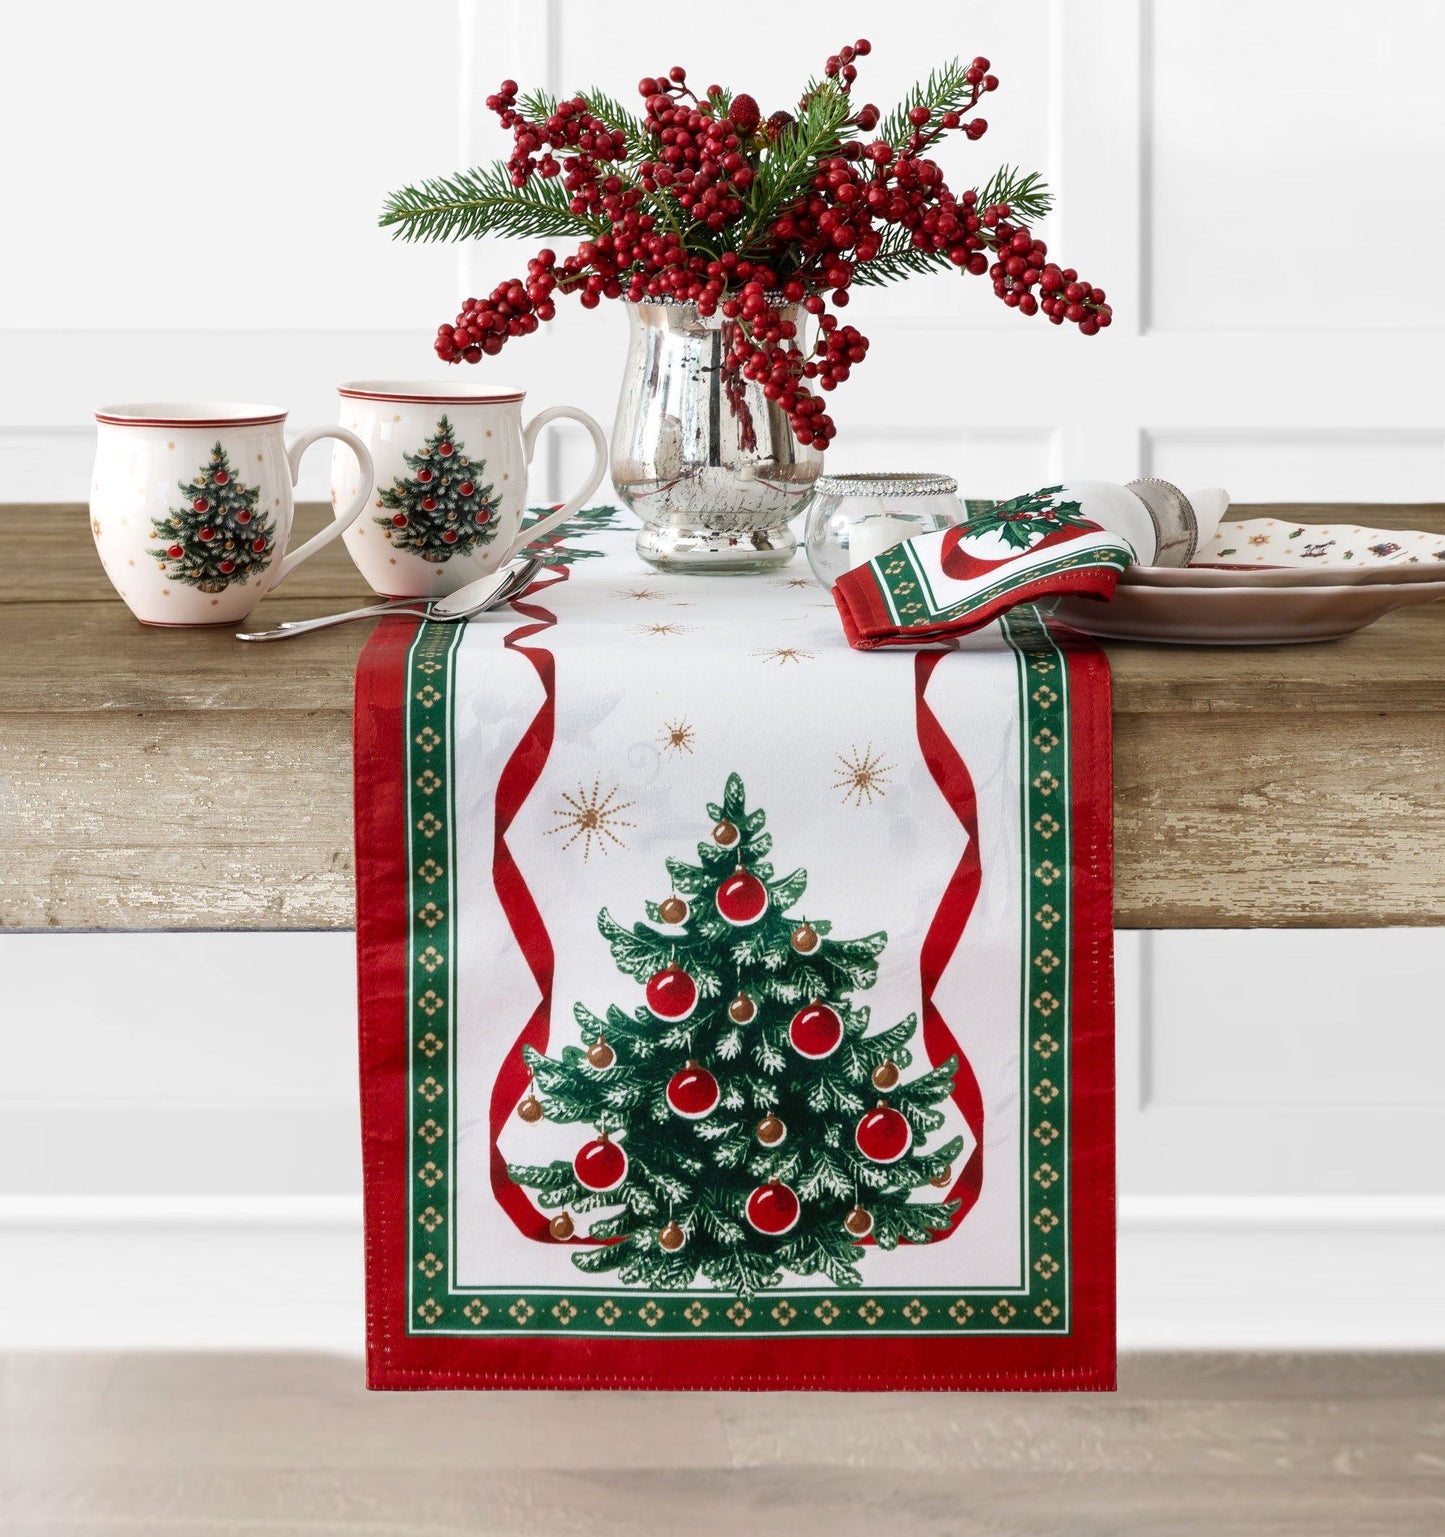 White holly damask runner with a Christmas tree design on each end. Entire runner is bordered in red/green and red ribbon design with holly sprigs.